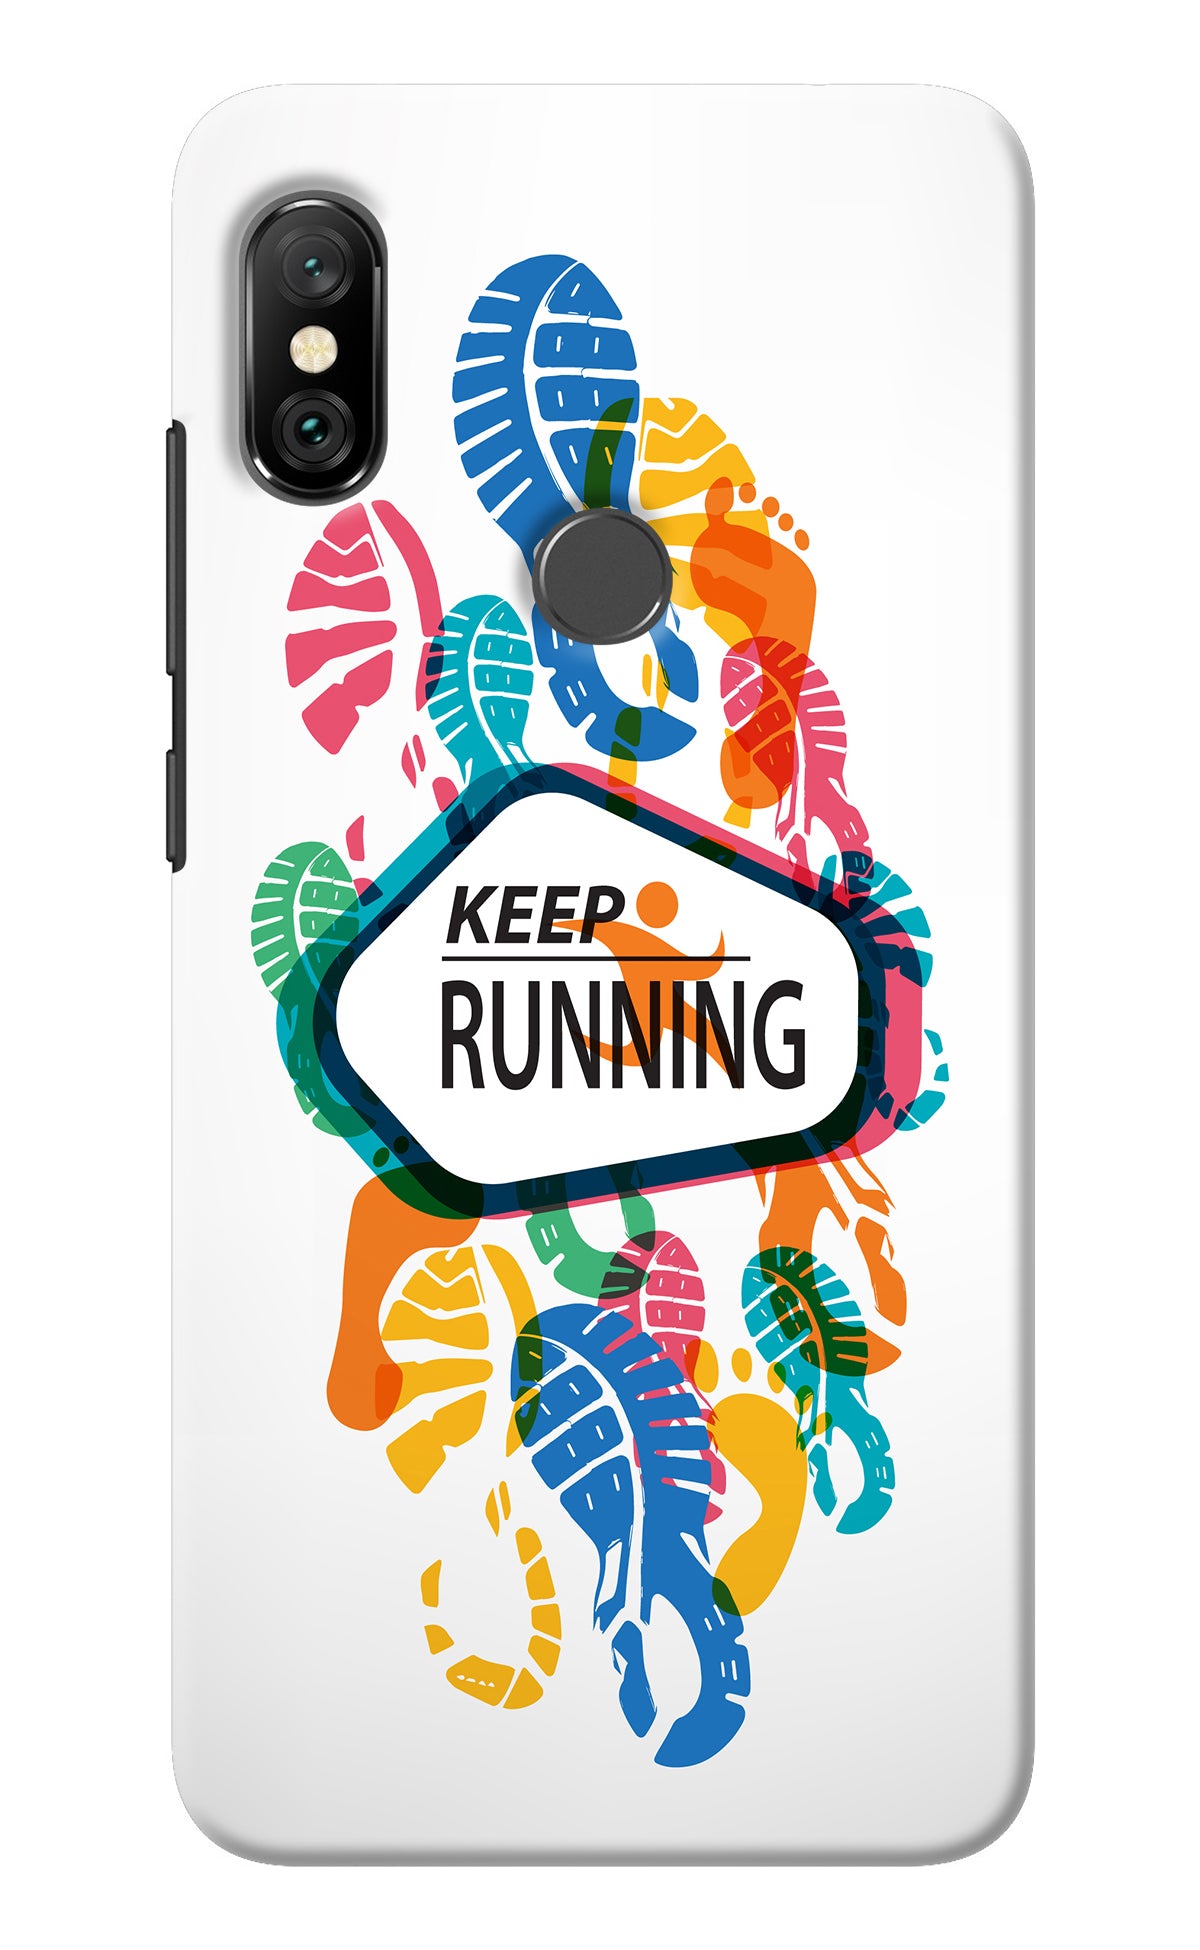 Keep Running Redmi Note 6 Pro Back Cover